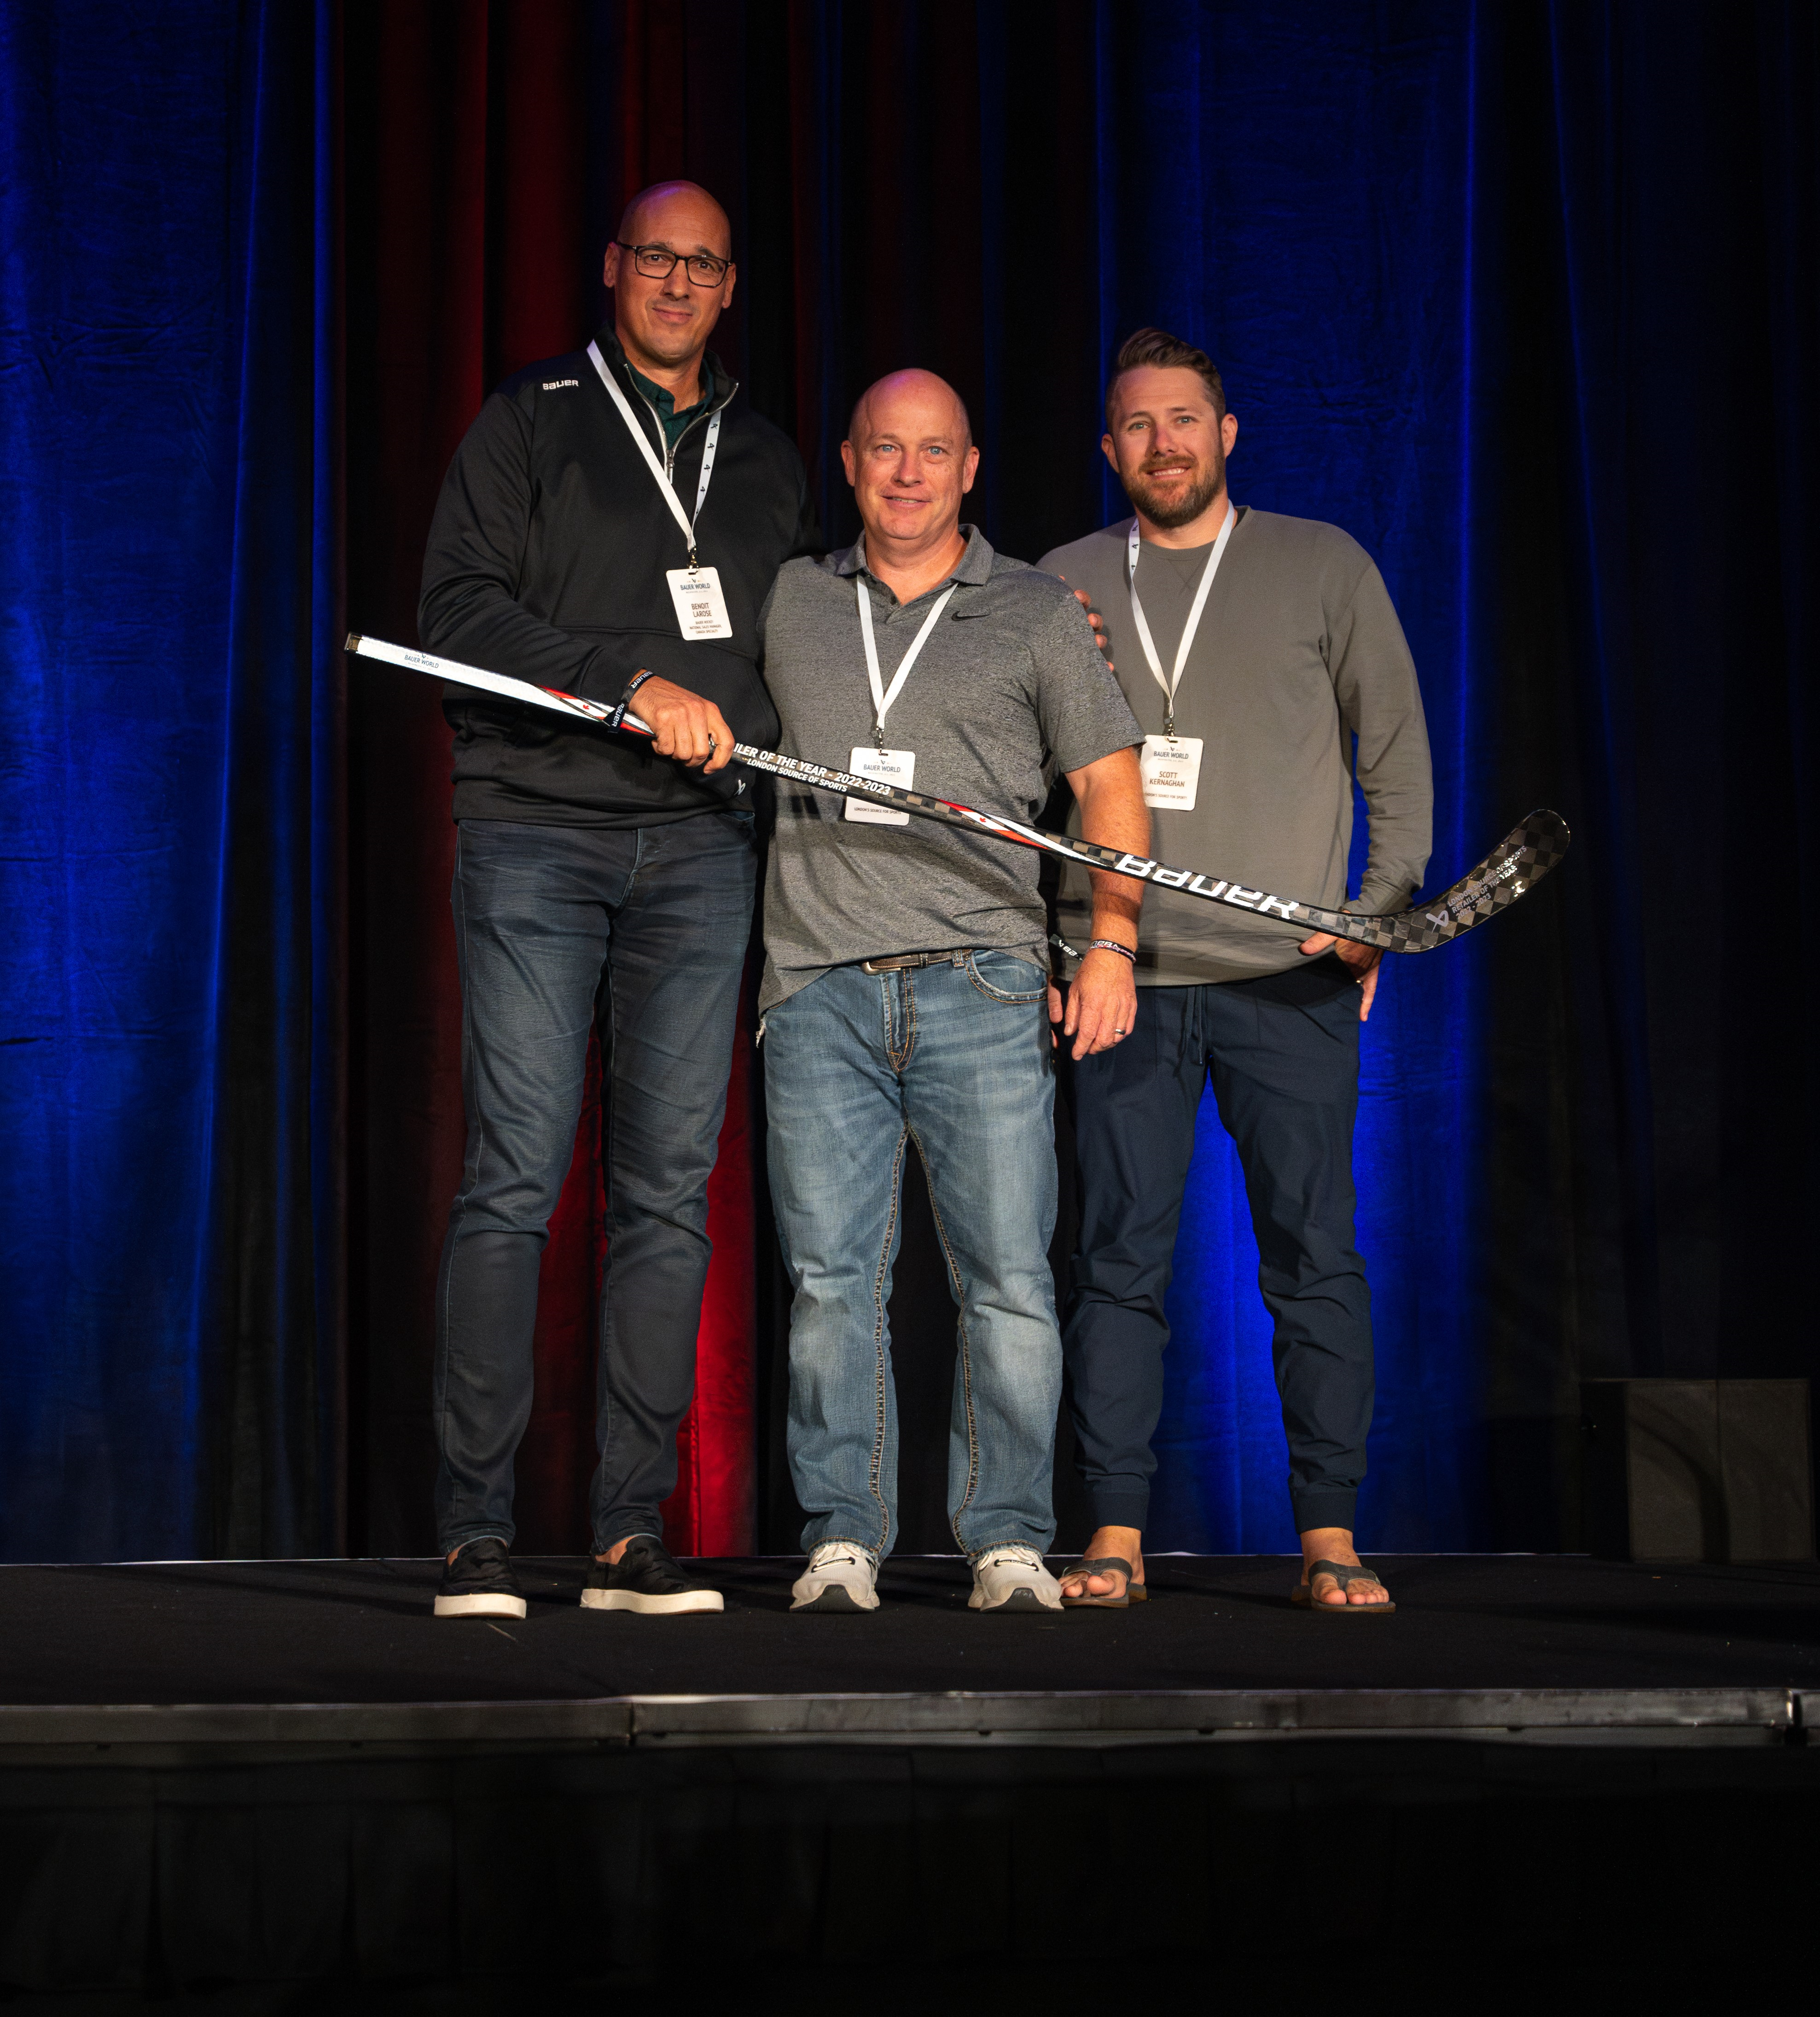 Photo left to right: Benoit Larose, National Sales Manager - Canada Specialty, Bauer Hockey, Mike Wanlin, Source for Sports, London, Scott Kernaghan, Source for Sports, London